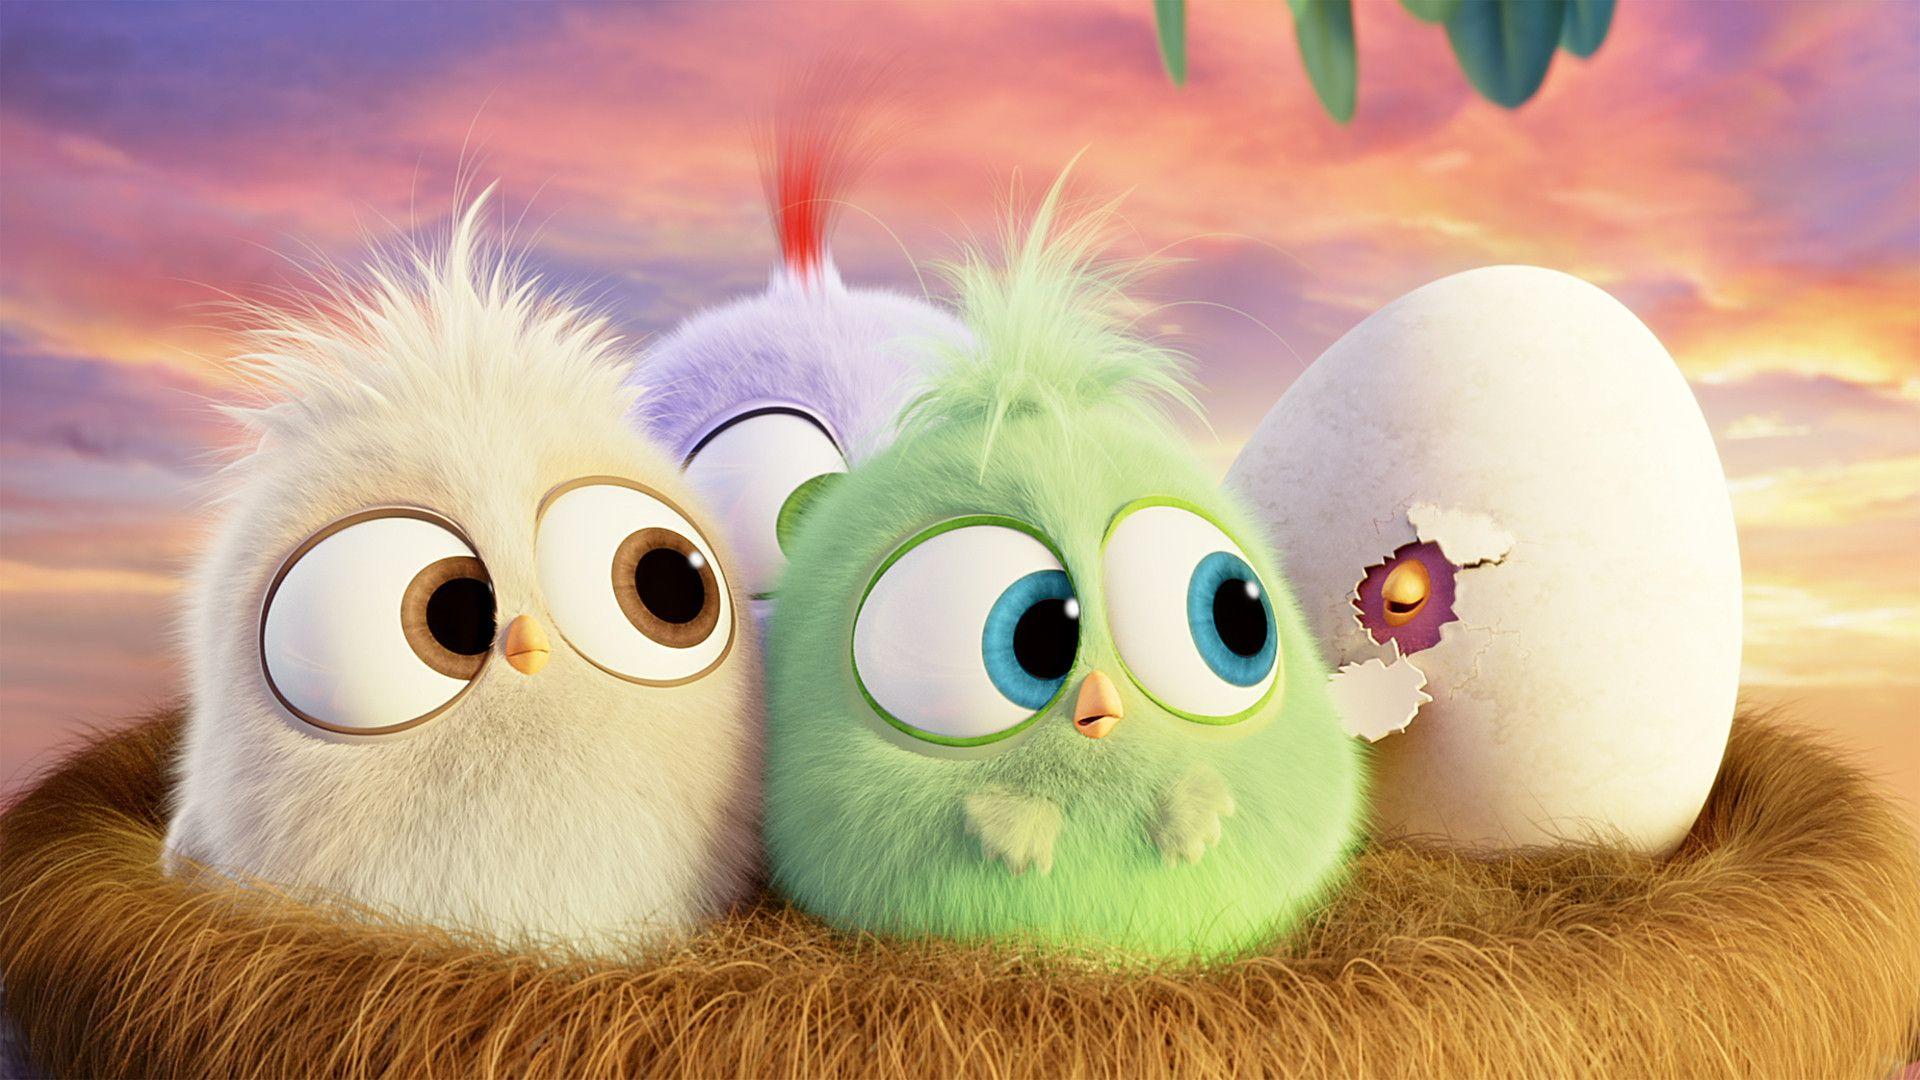 Hatchlings Angry Birds HD Wallpaper [1920x1080]